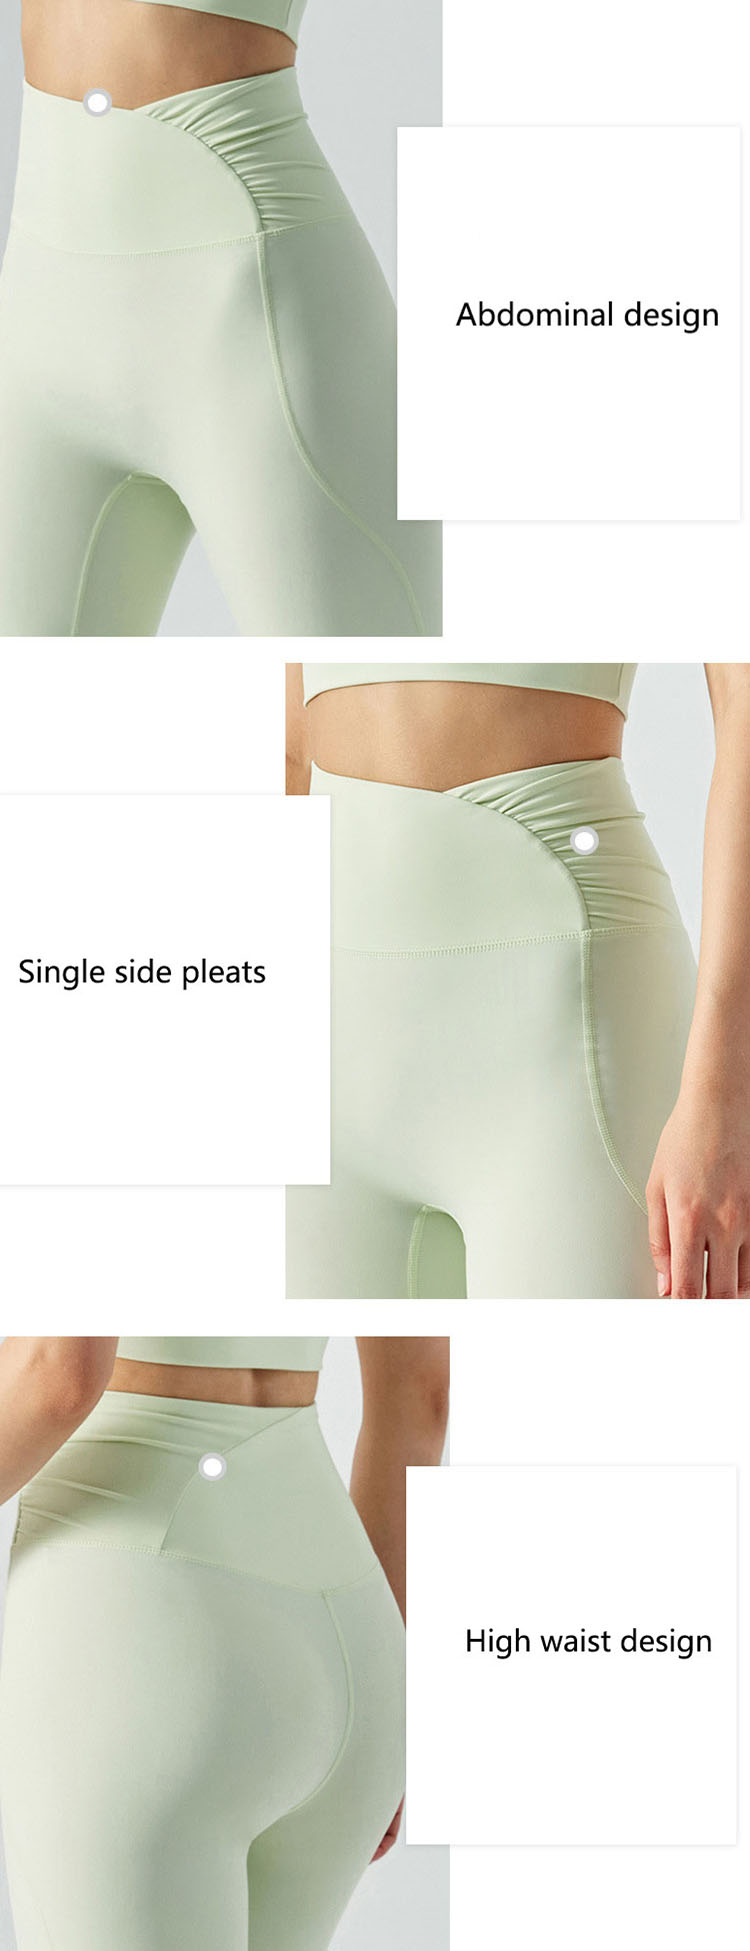 Good workout pants with folds on one side create completely different asymmetric folds